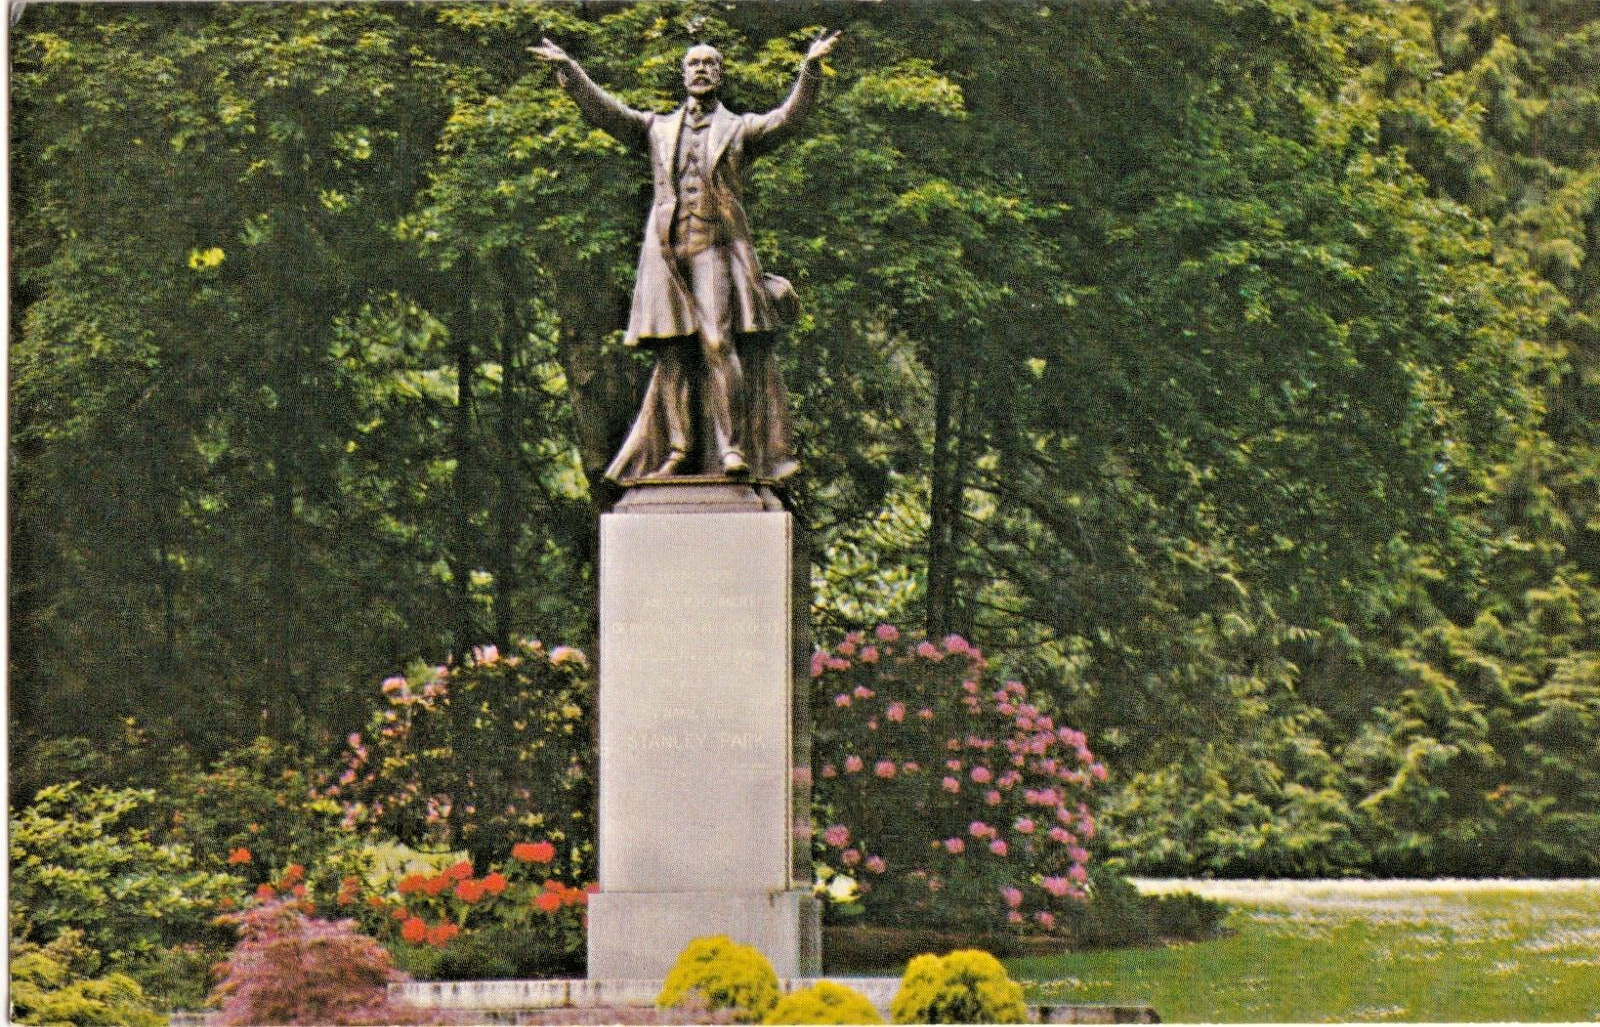 Lord Stanley Statue-Vancouver B.C. Canada-vintage unposted postcard